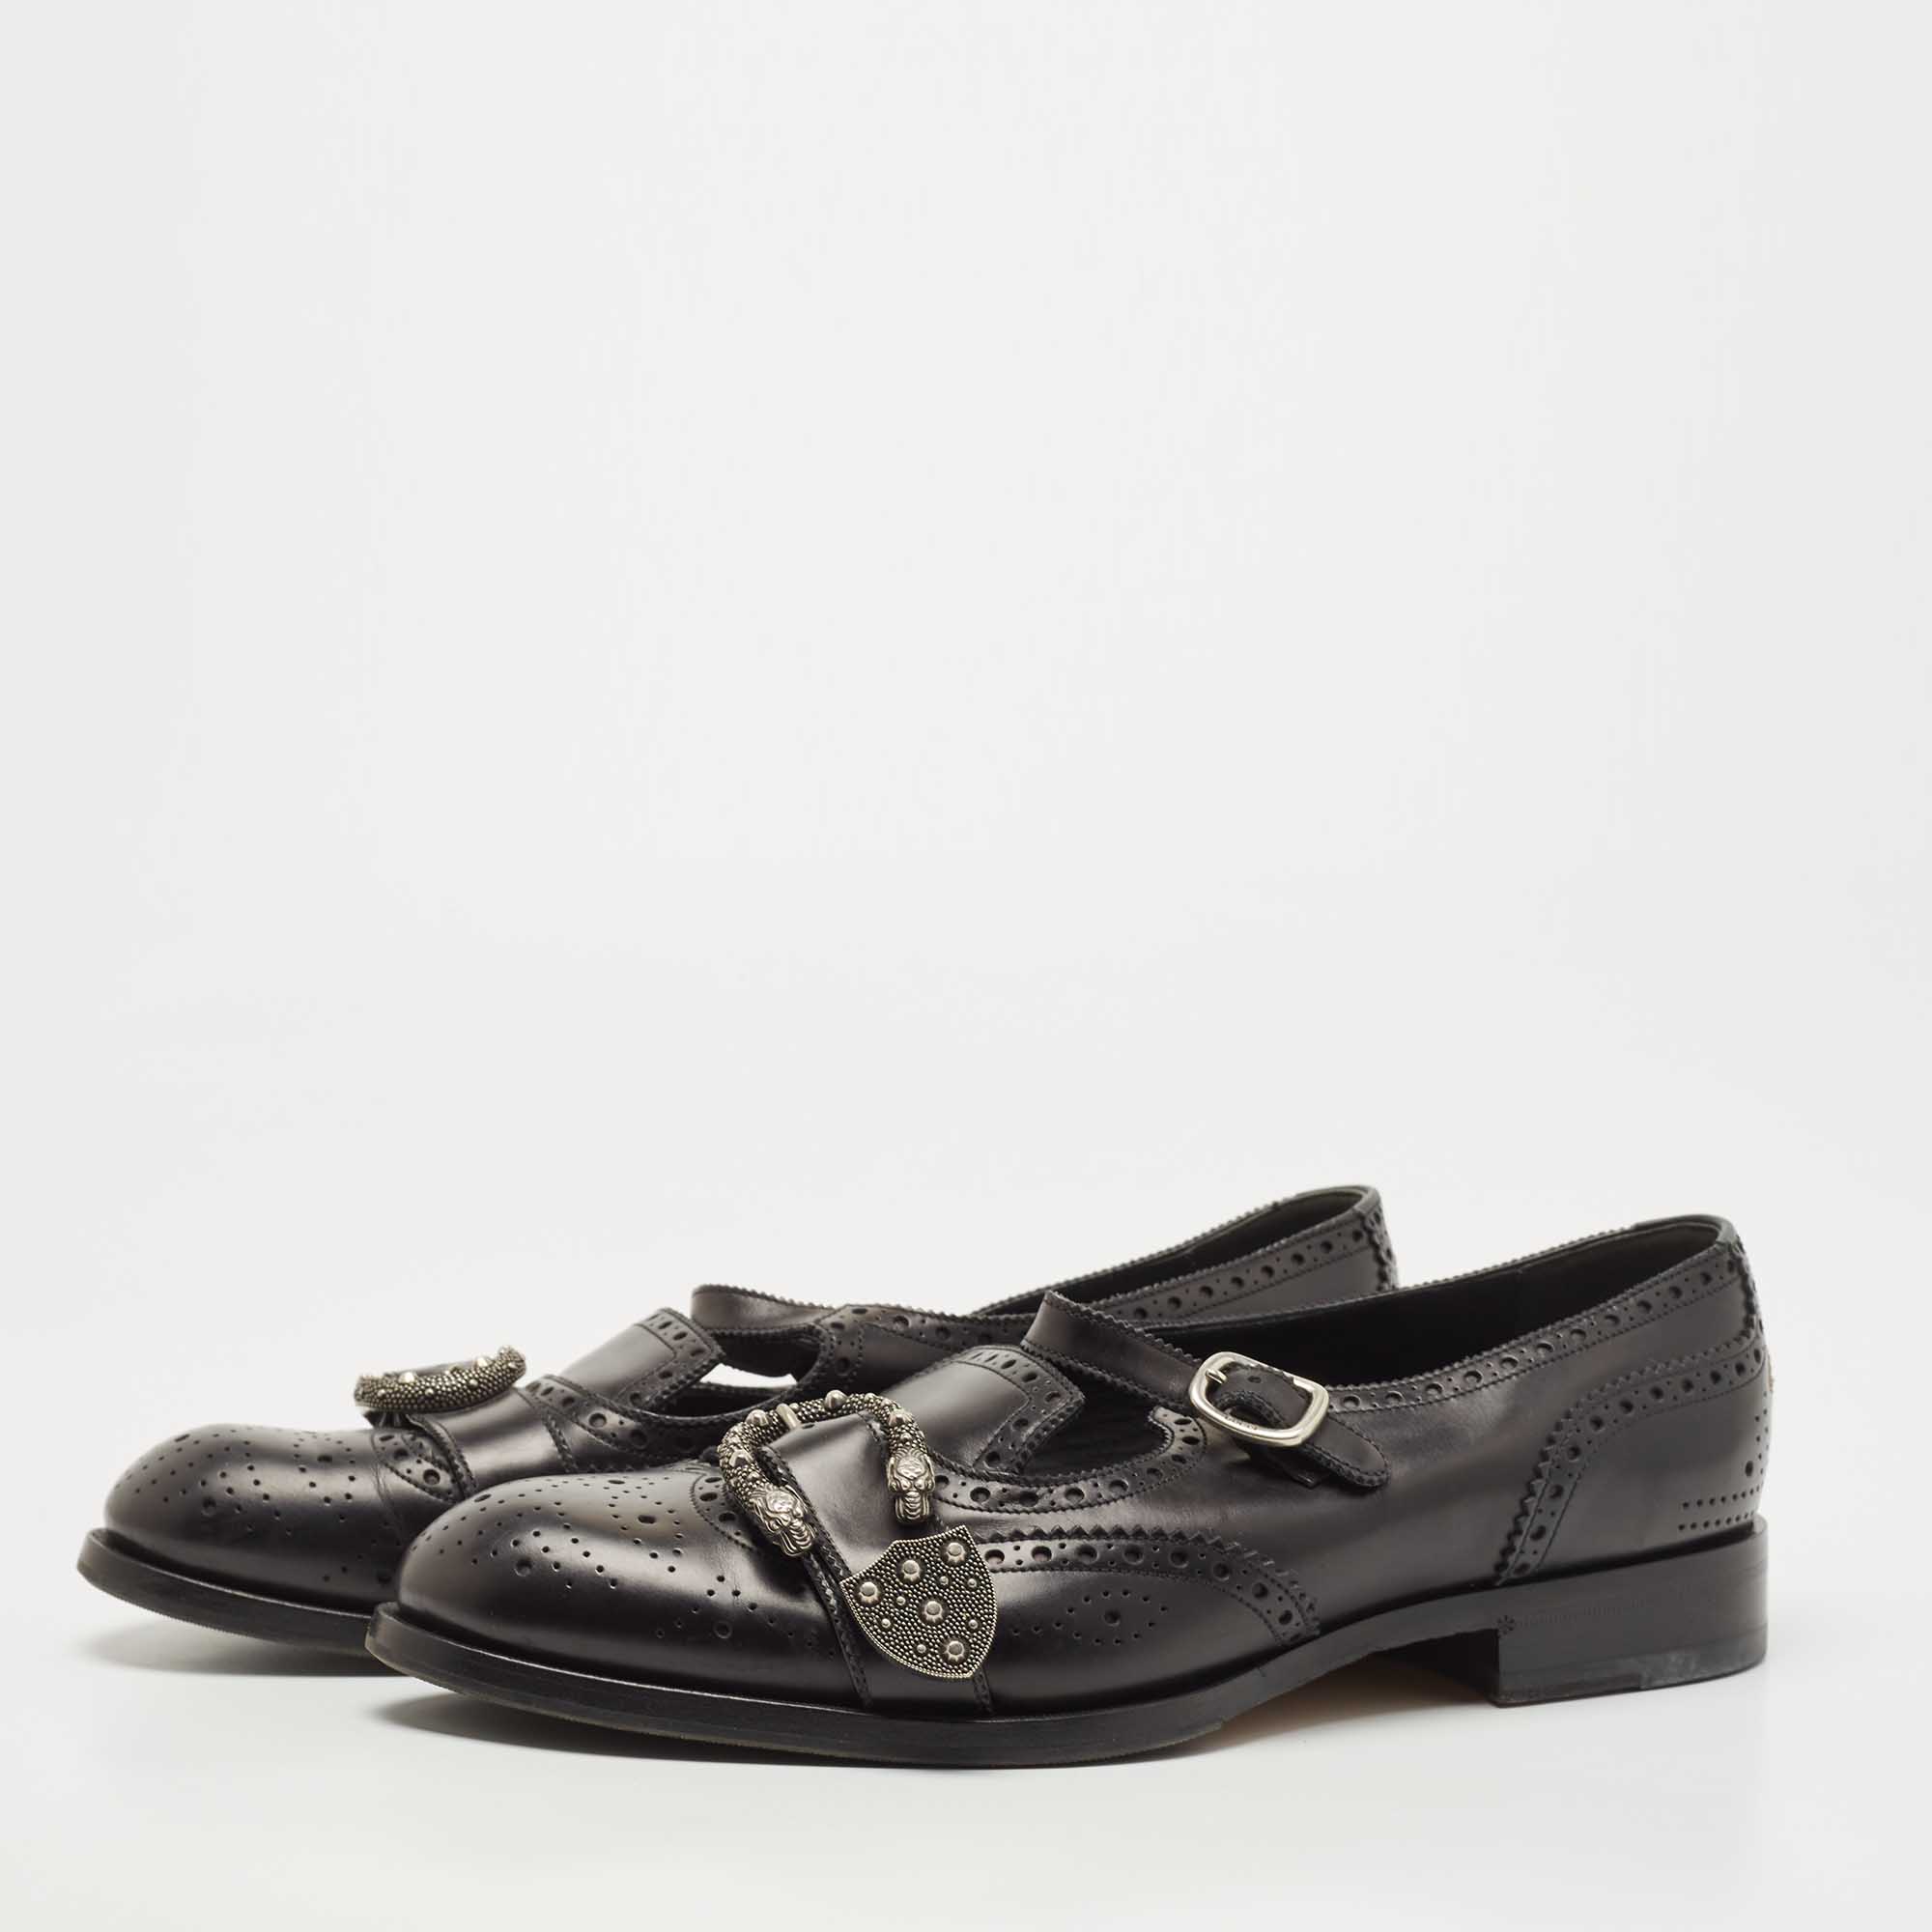 

Gucci Black Leather Dionysus Bee Brogue Buckle Details Loafers Size